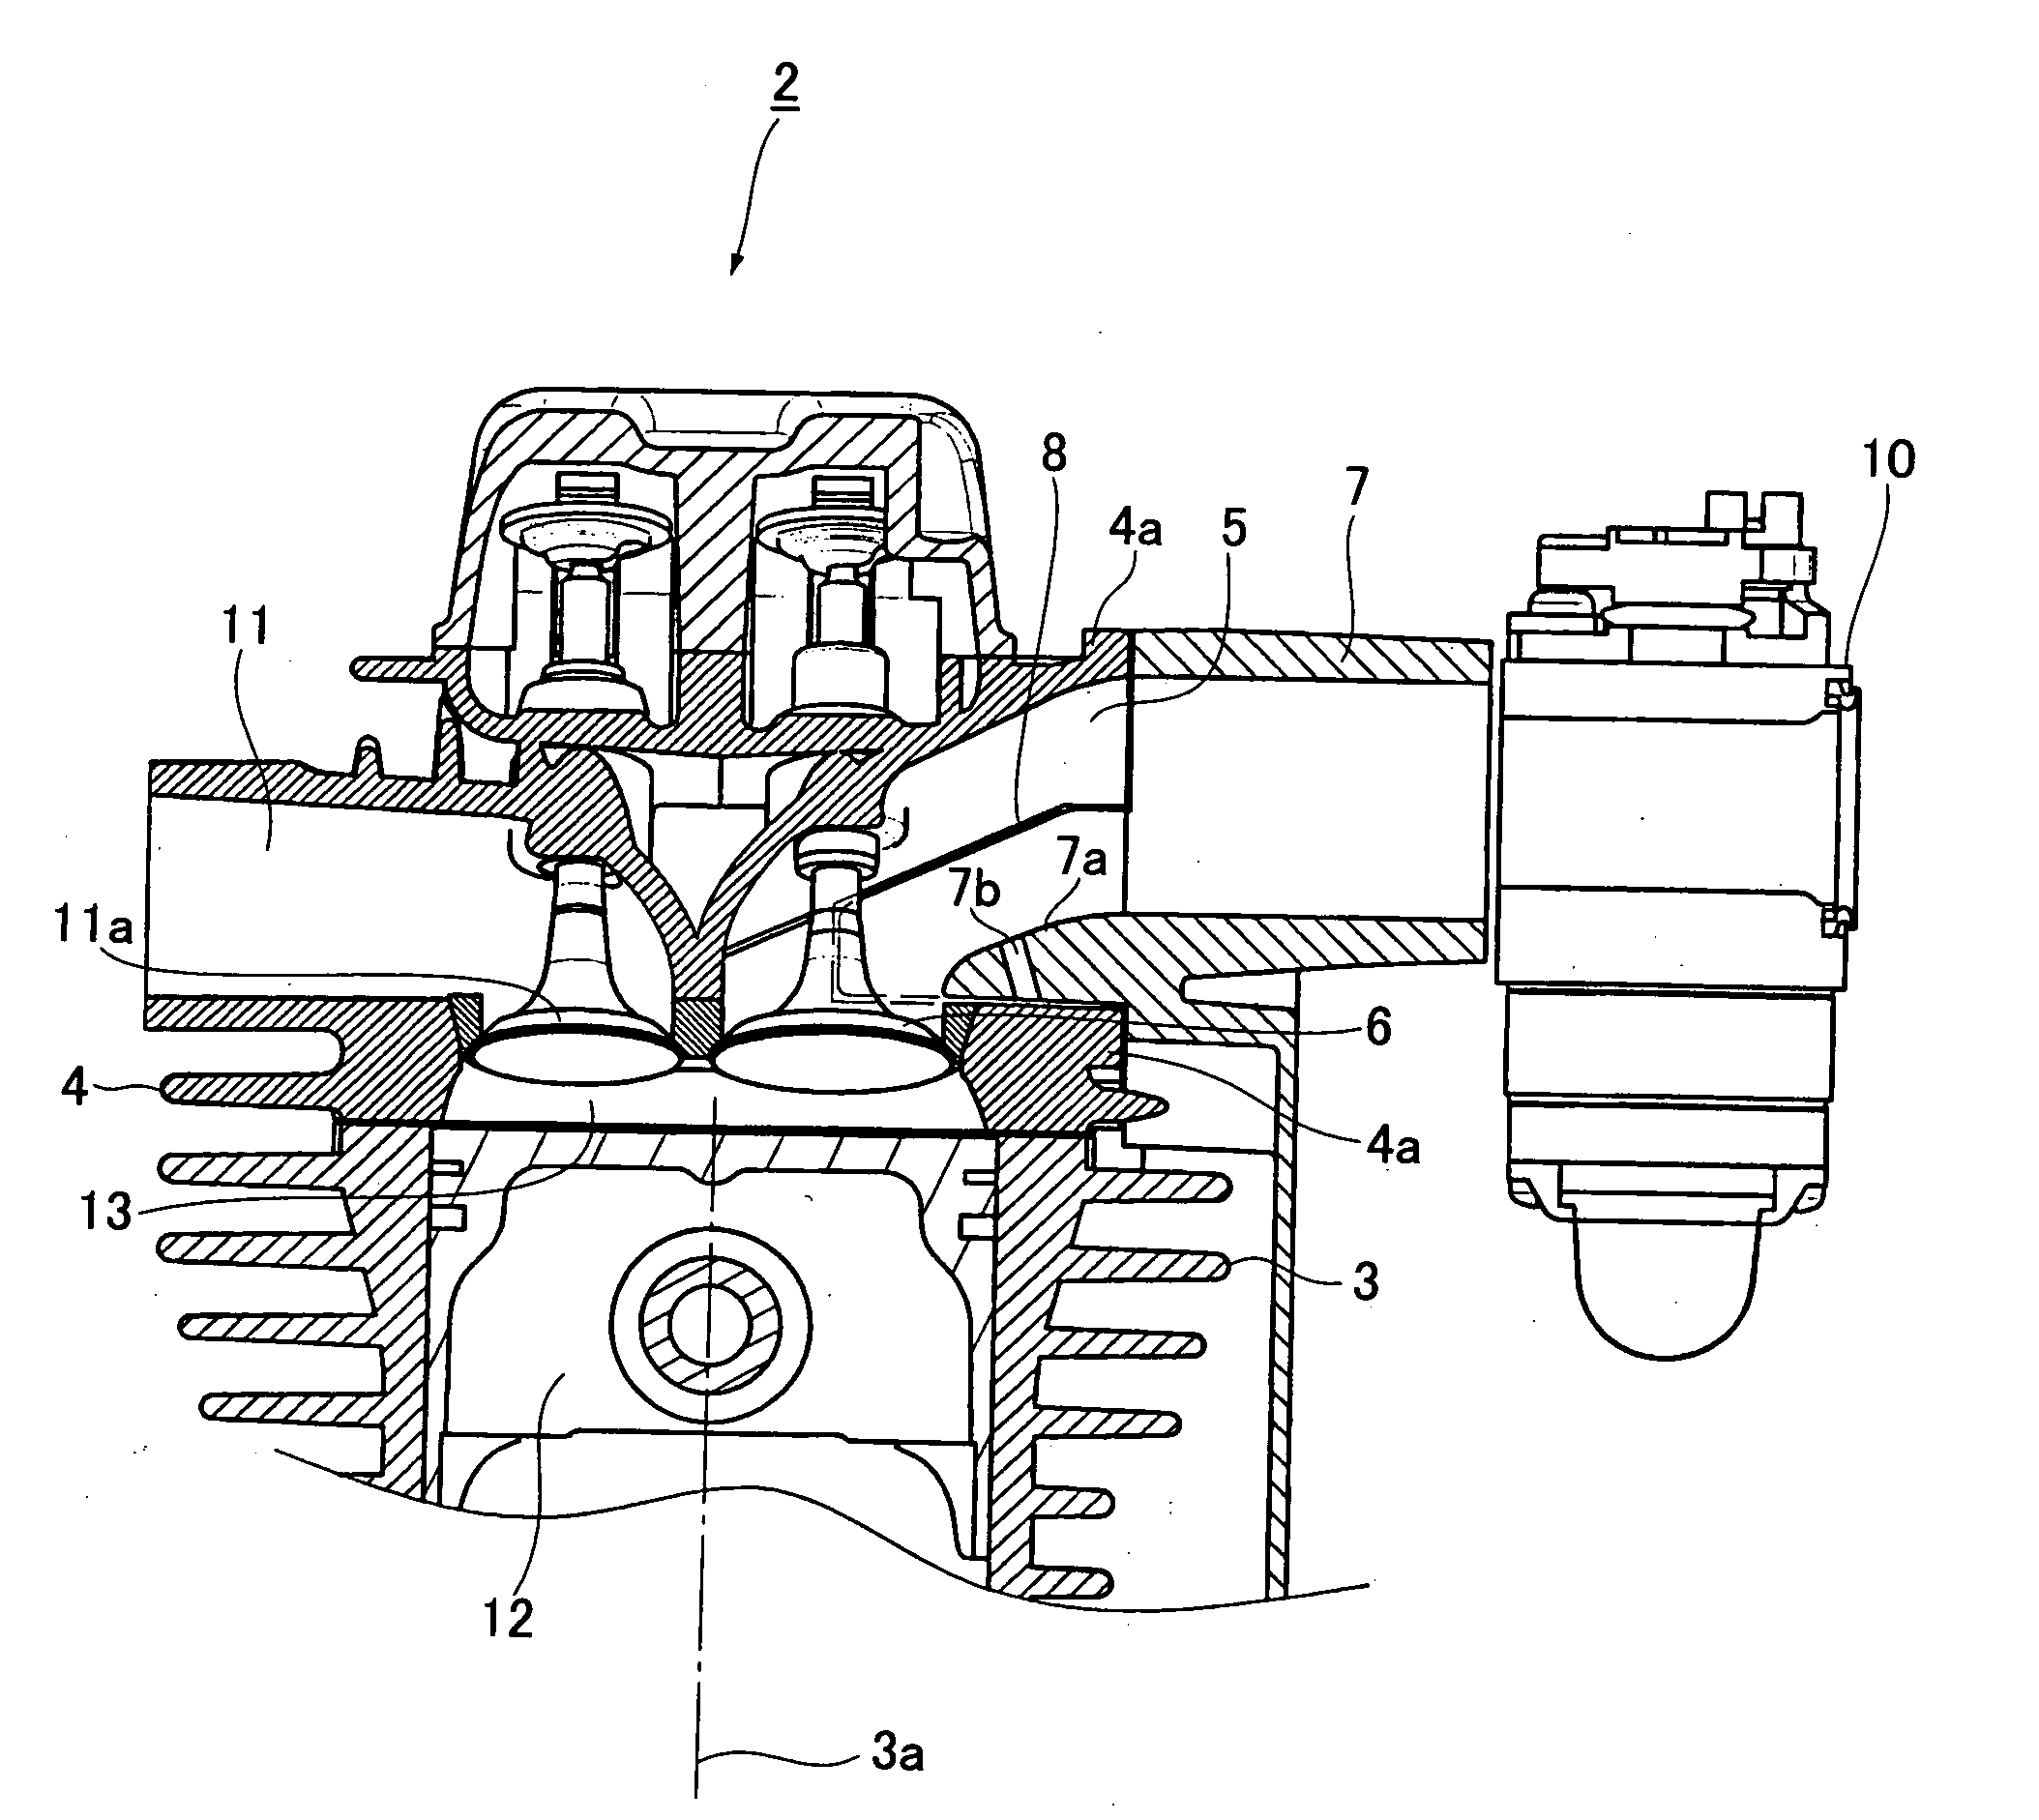 Intake port for 4-cycle engine